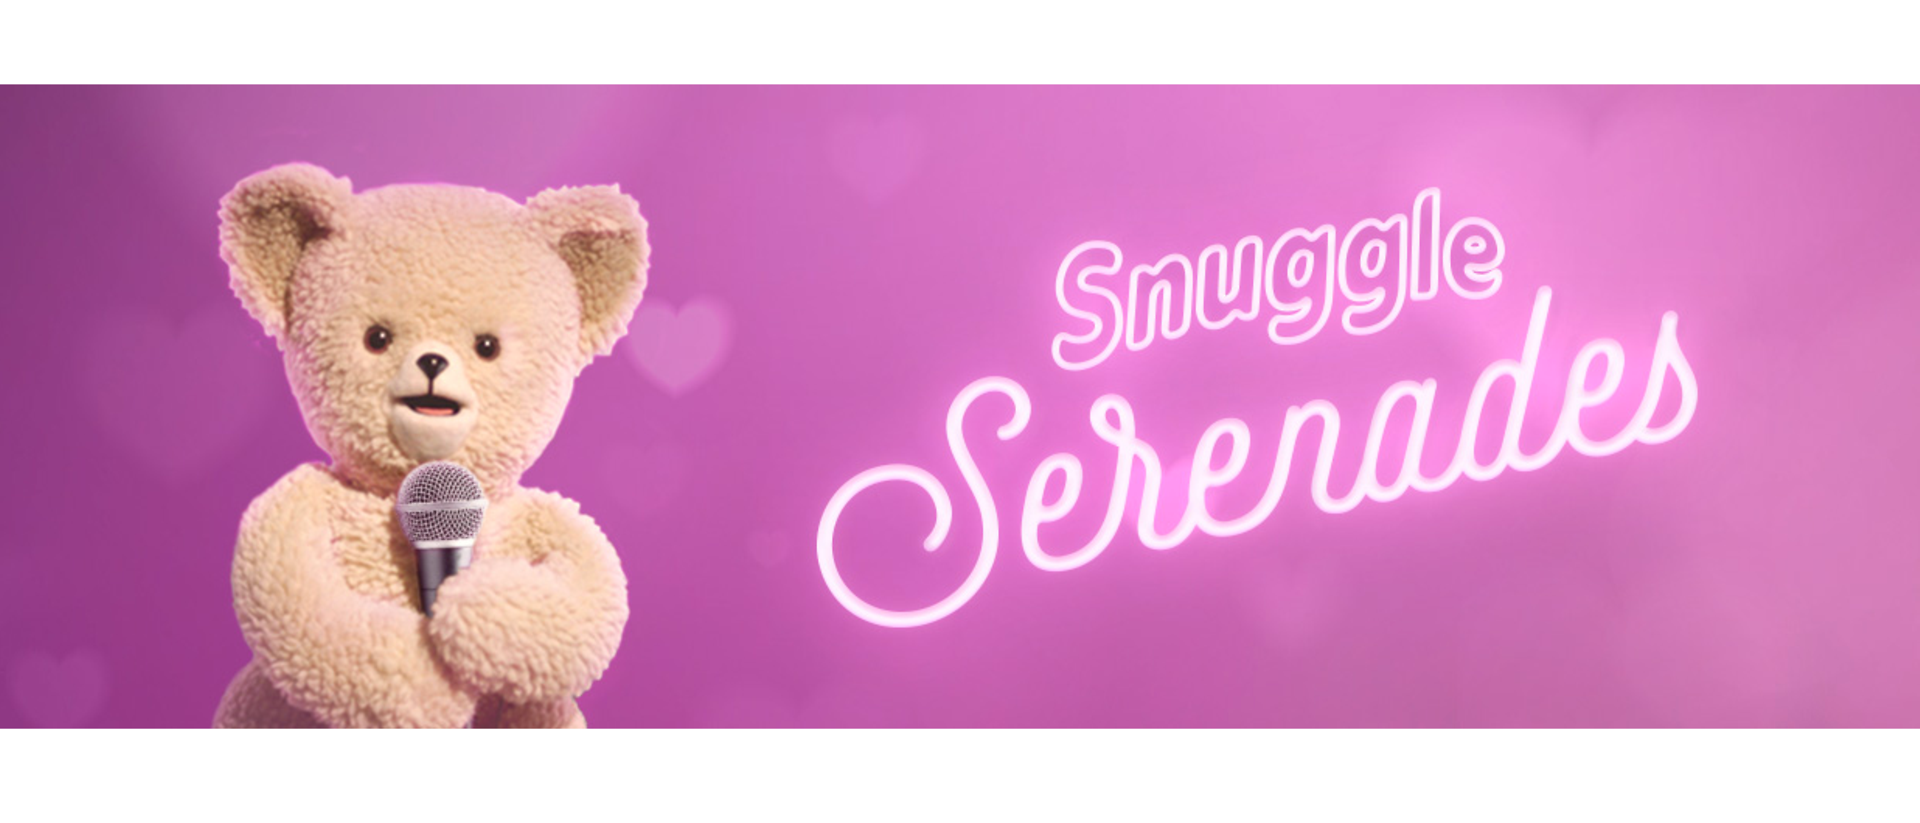 Have Snuggle Bear serenade your friends and loved ones this Valentine’s Day